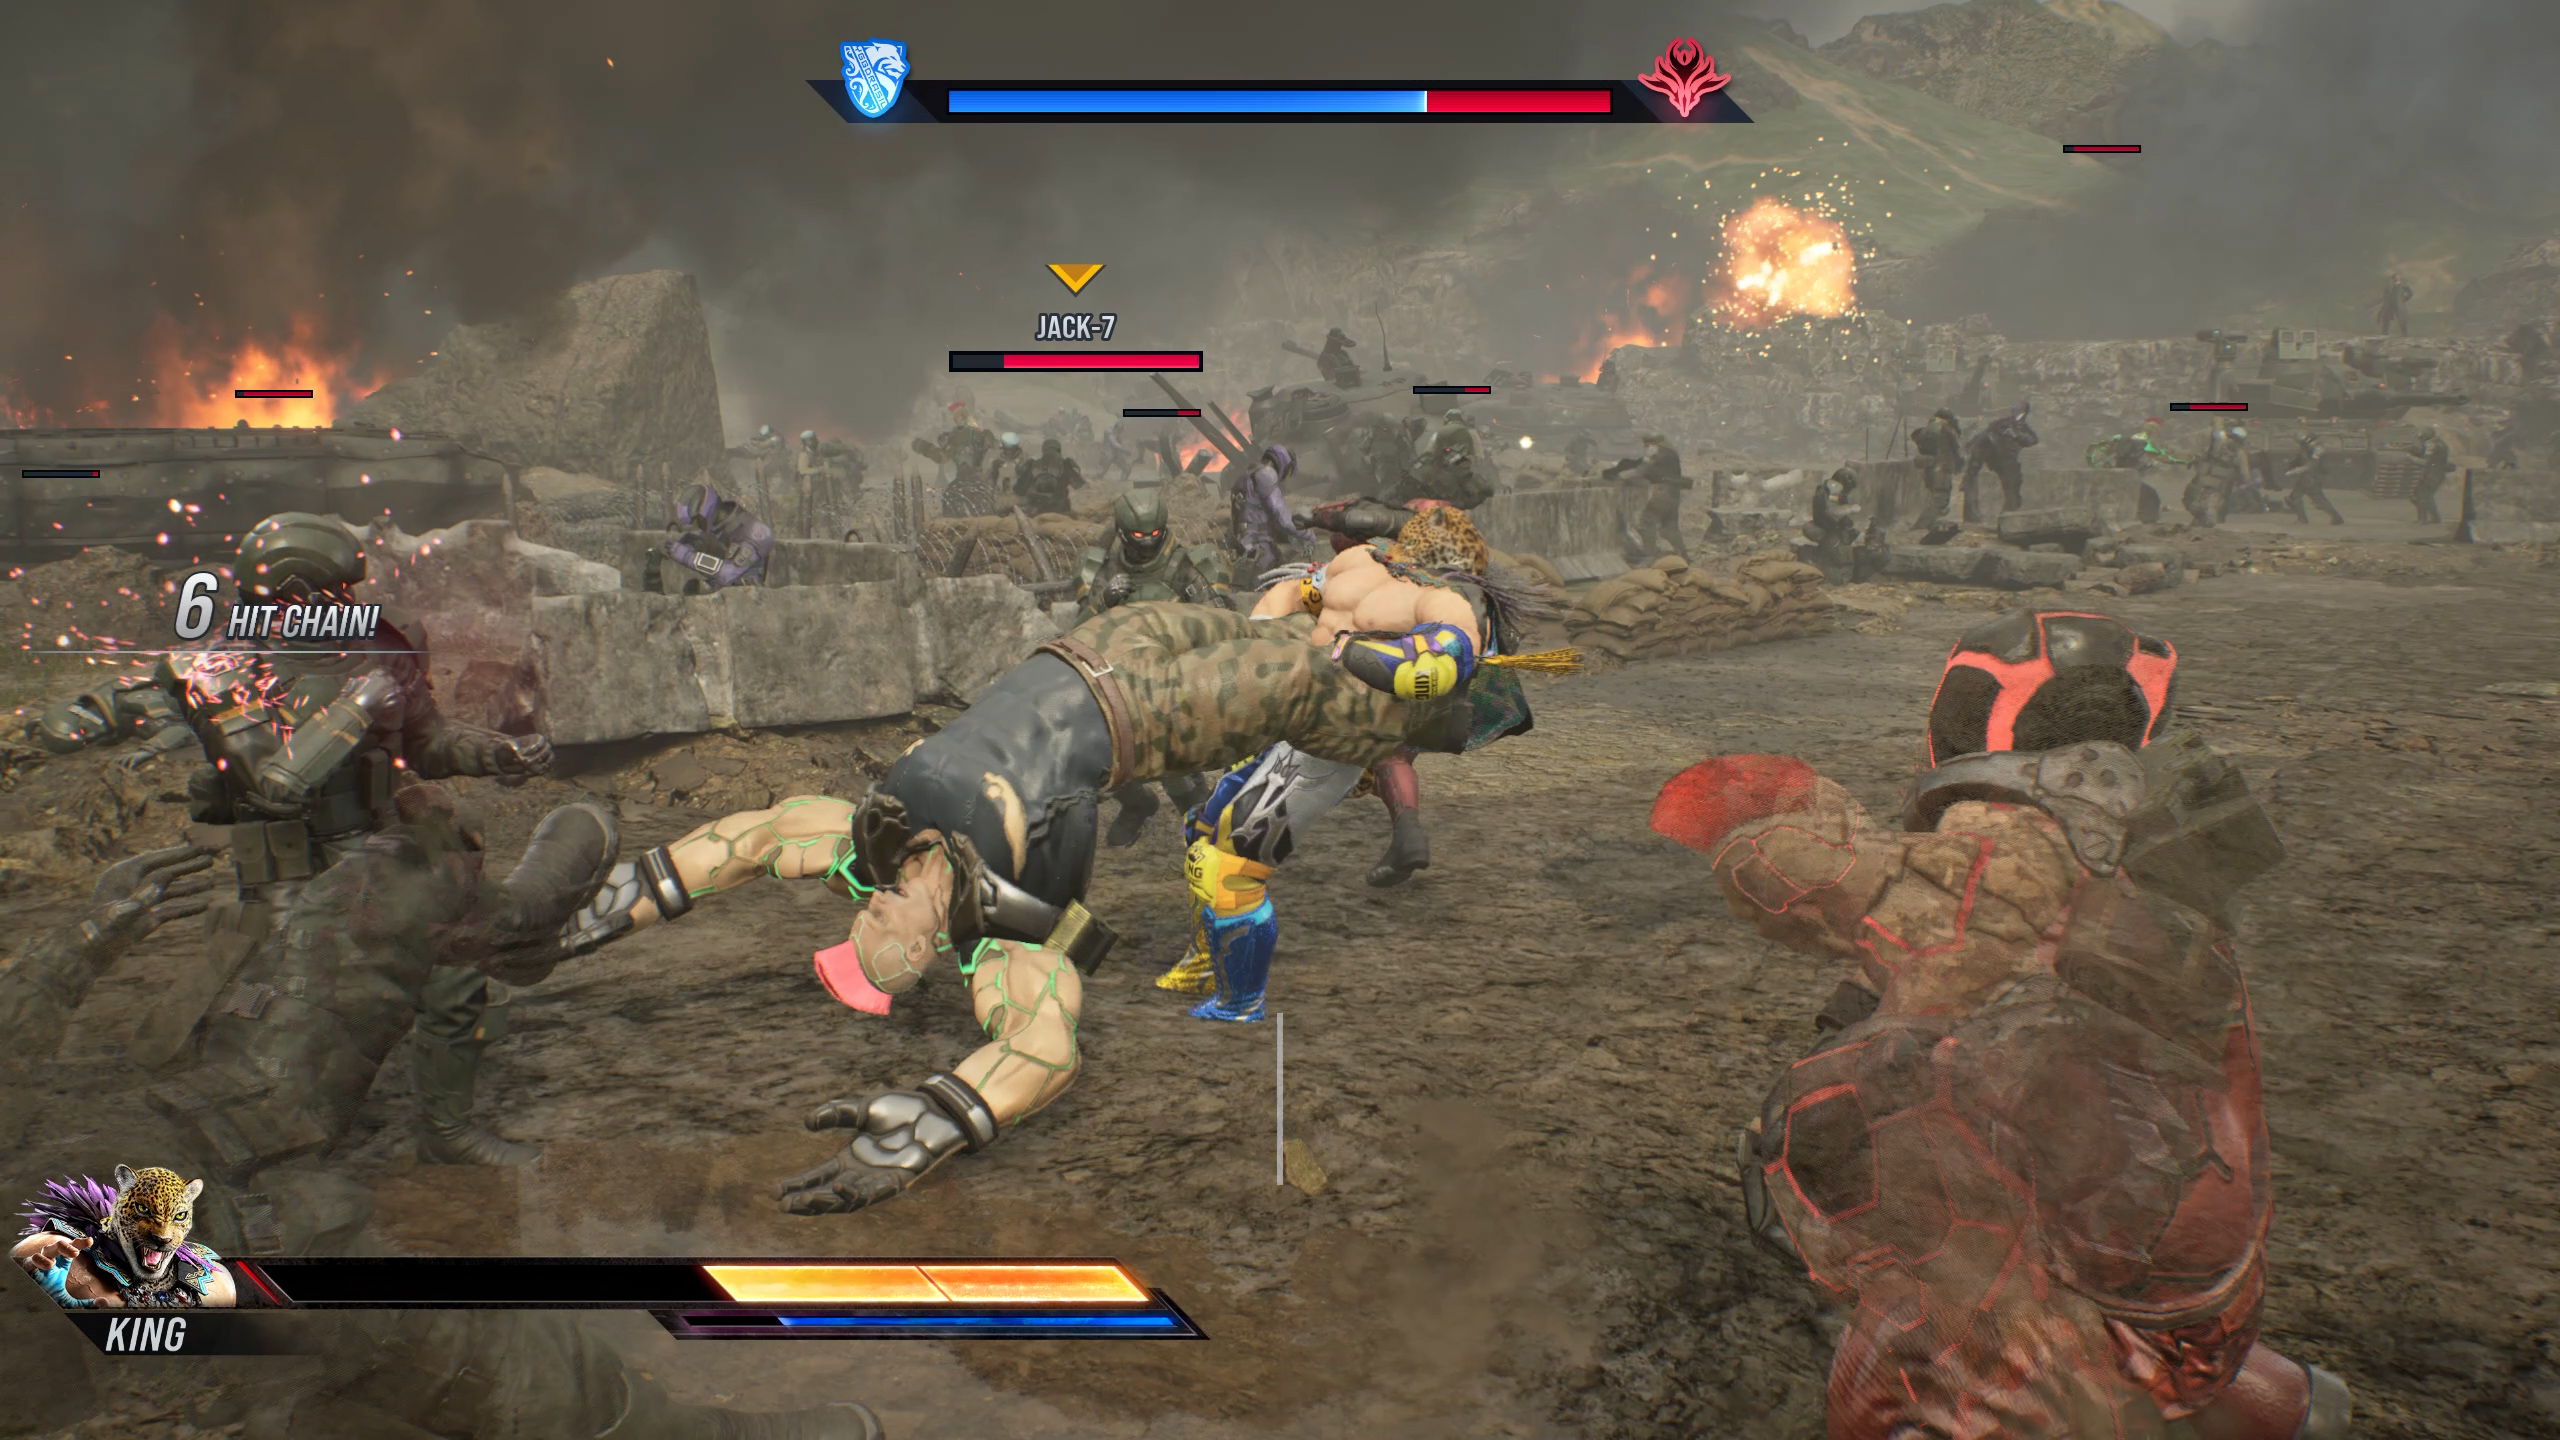 King using Giant Swing on an enemy to hit other surrounding enemies